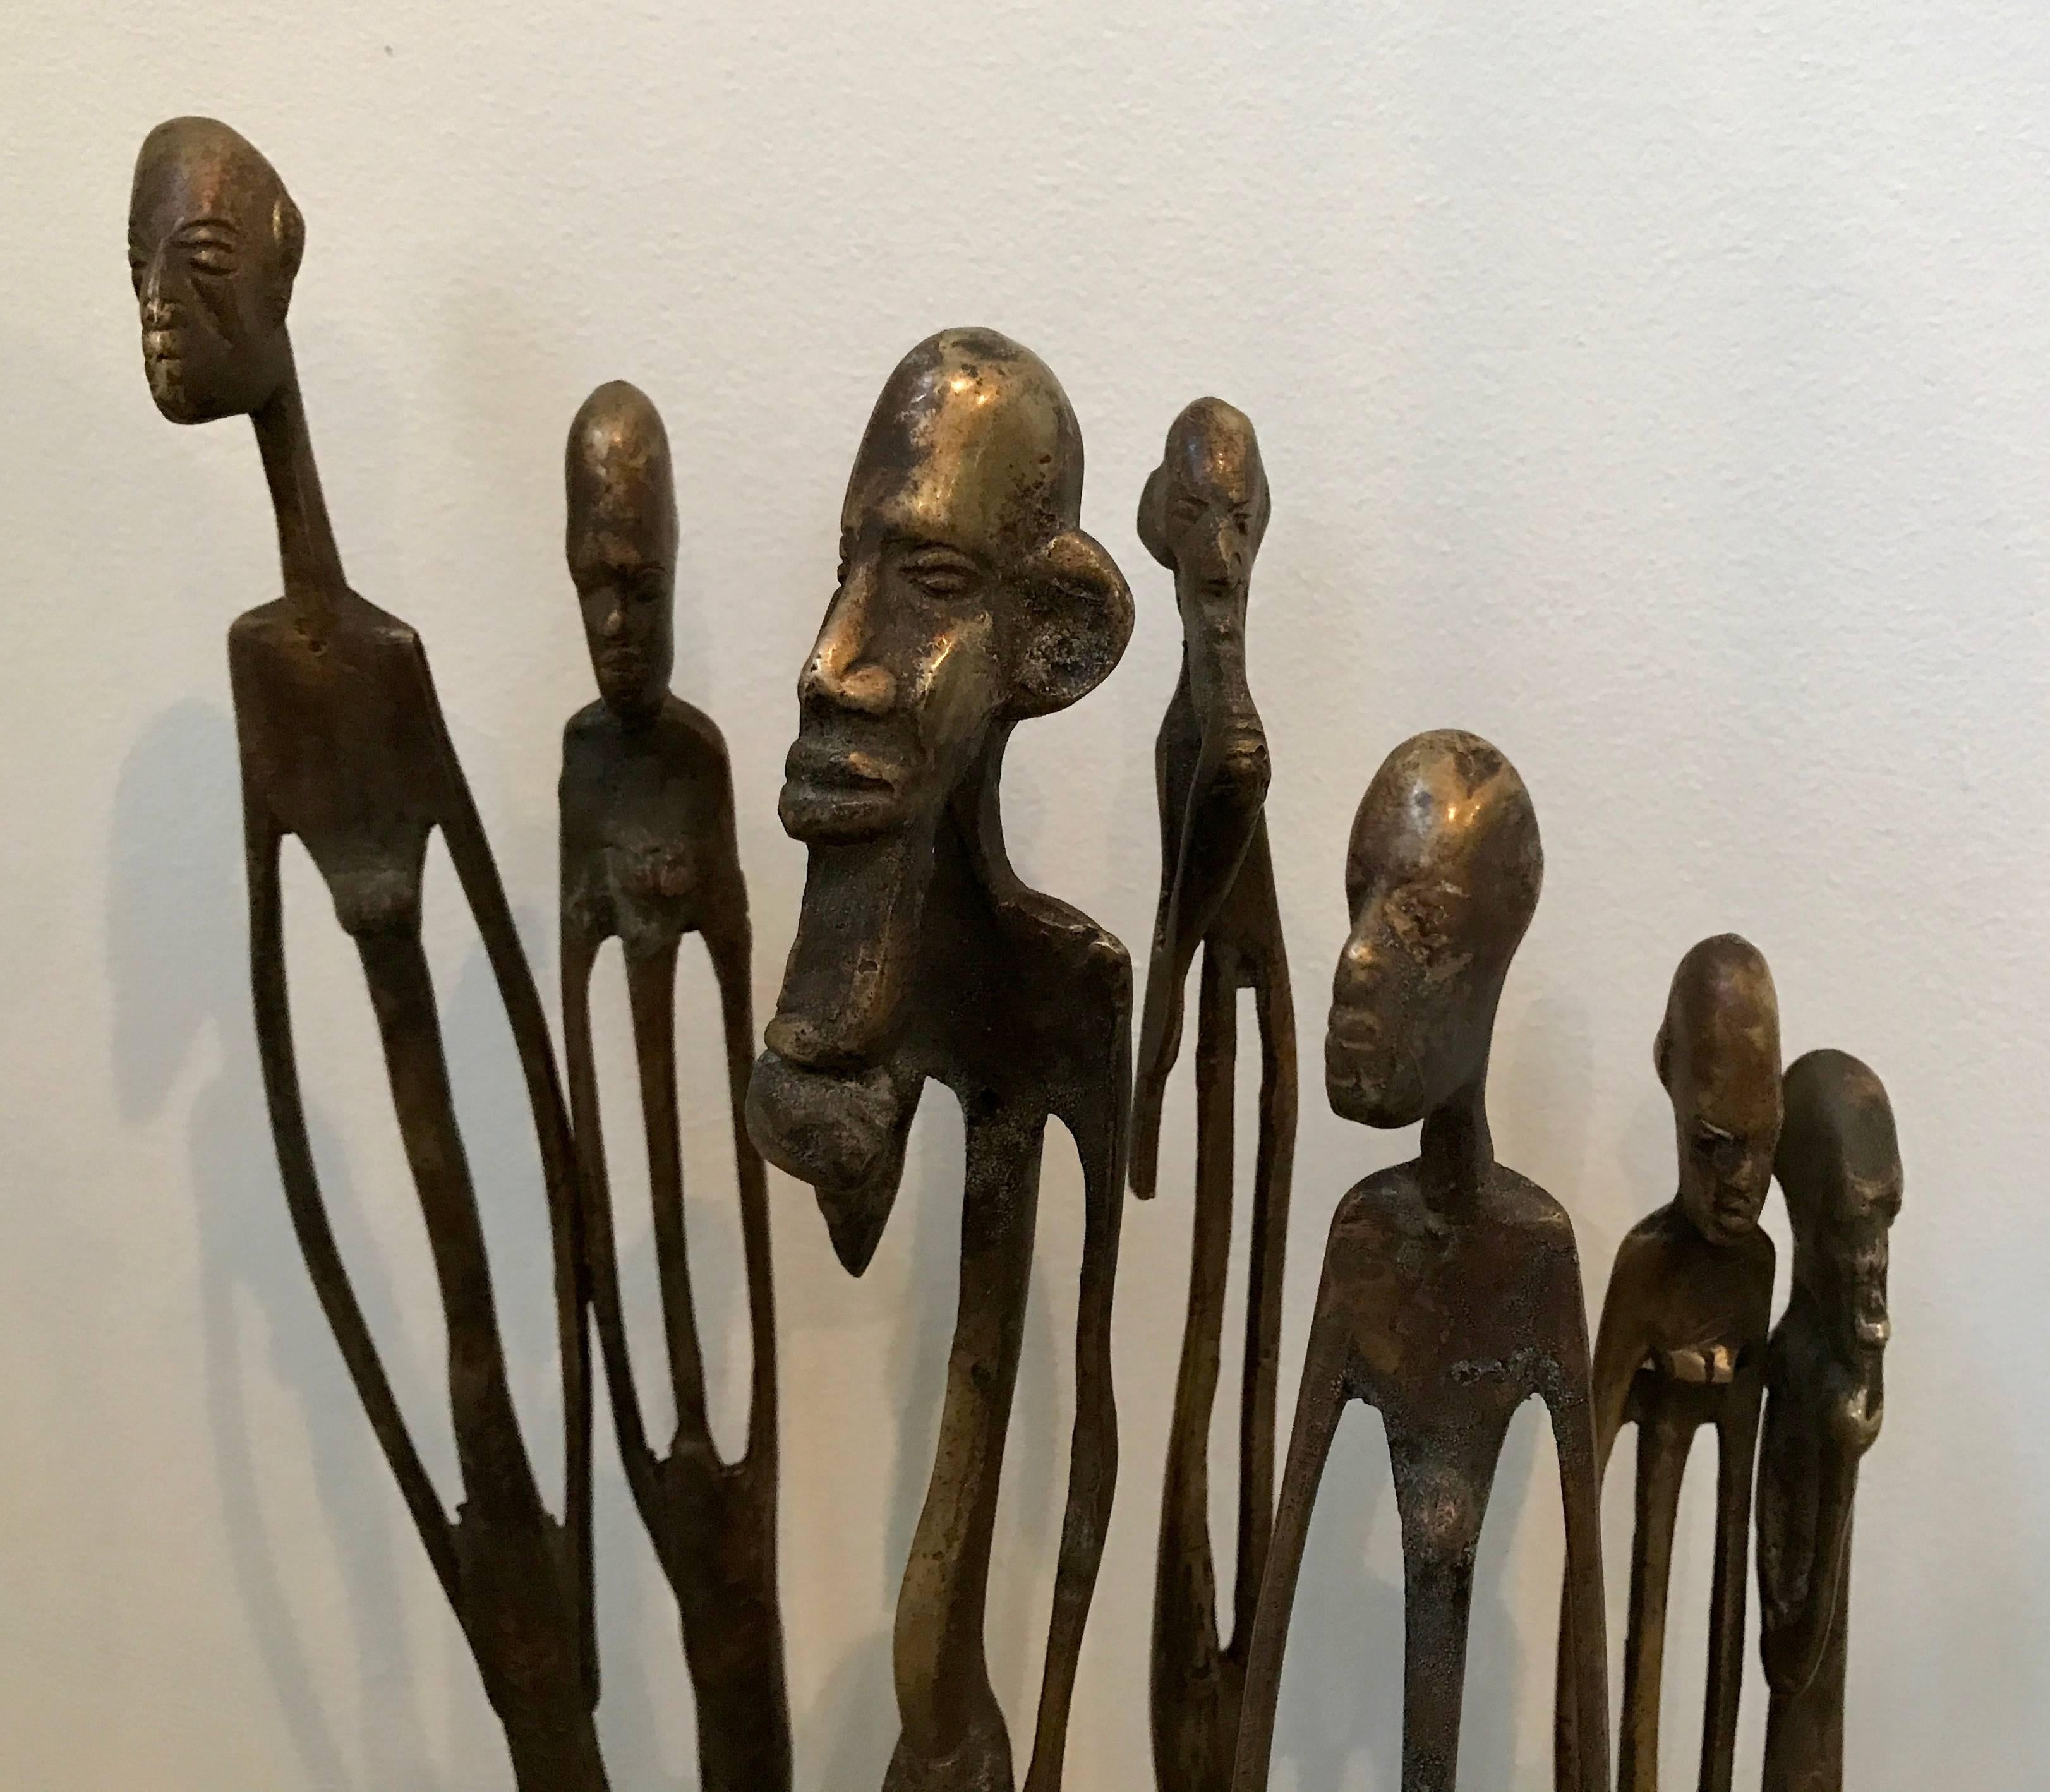 Very cool grouping of five abstract figural sculptures in the style of Giocometti, cast in bronze.